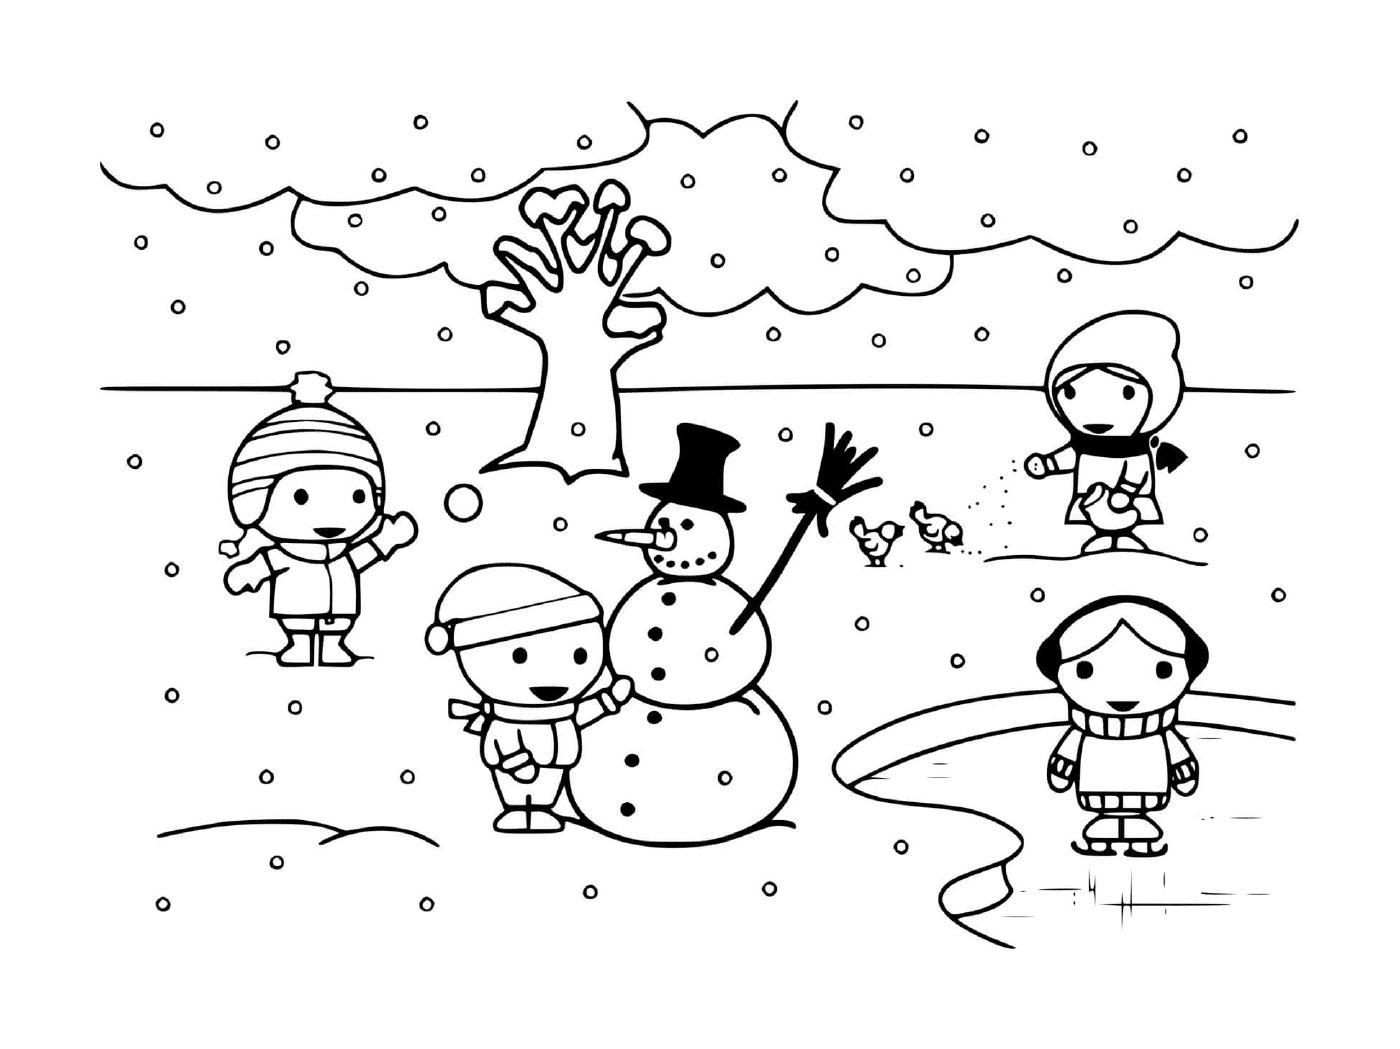  Children play with snow in winter 